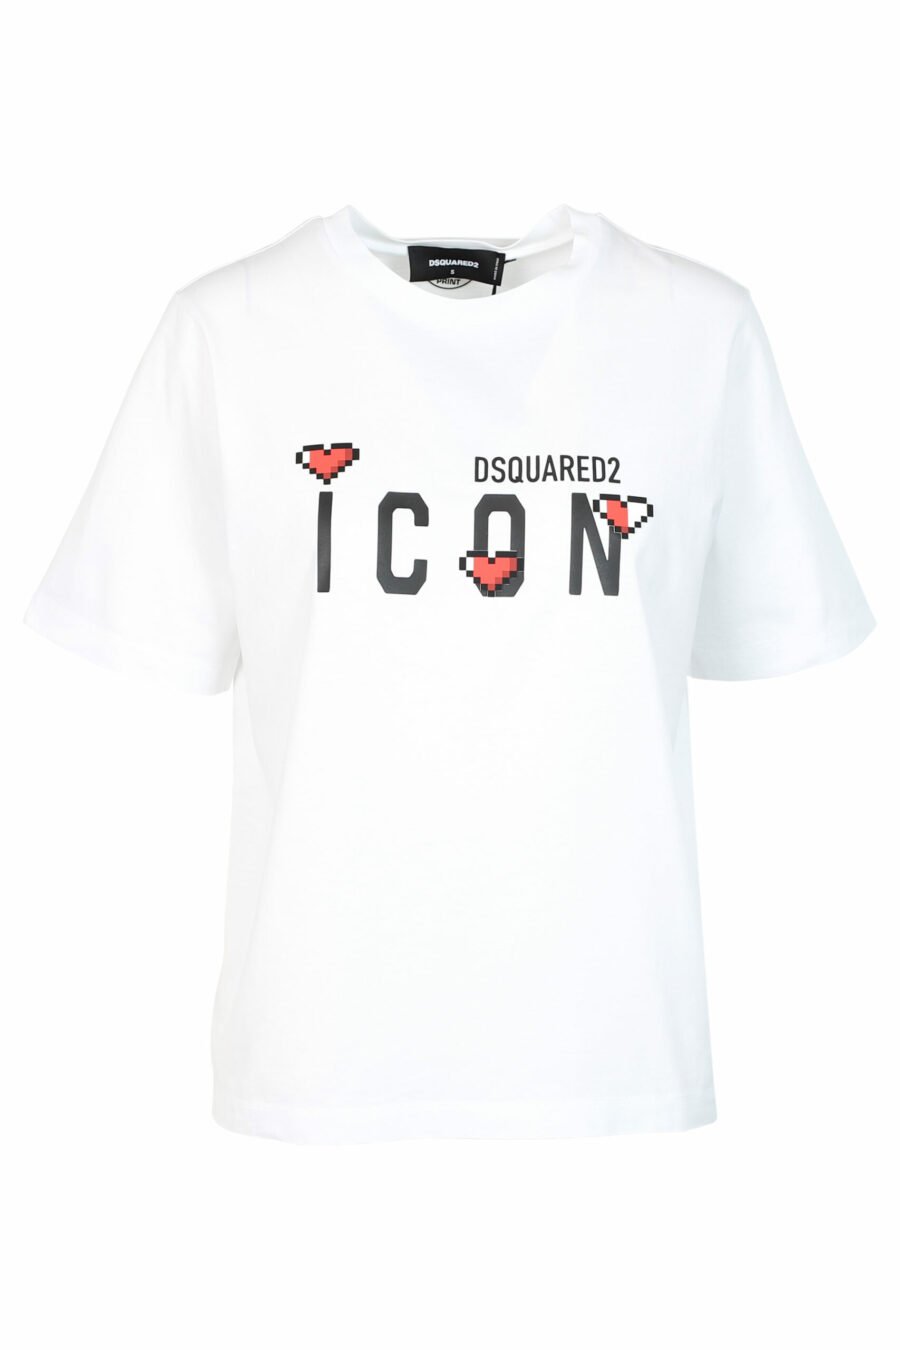 Black T-shirt with "icon game" logo - 8052134989265 scaled